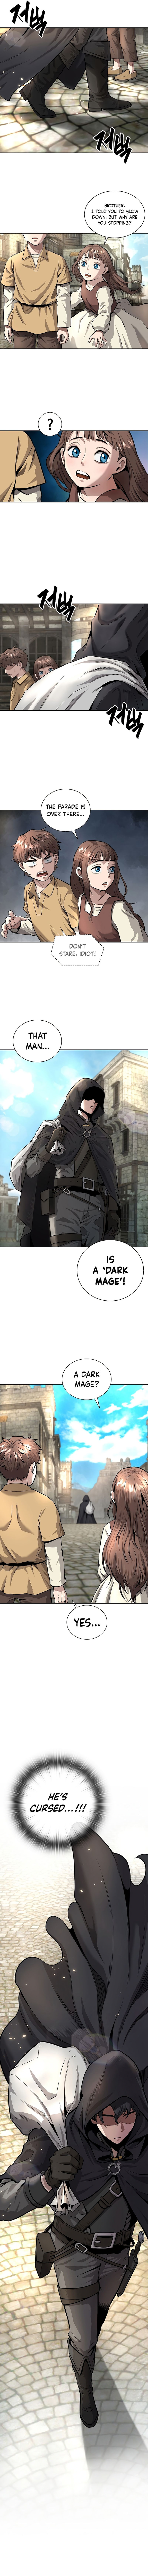 The Dark Mage’s Return to Enlistment Chapter 1 page 3